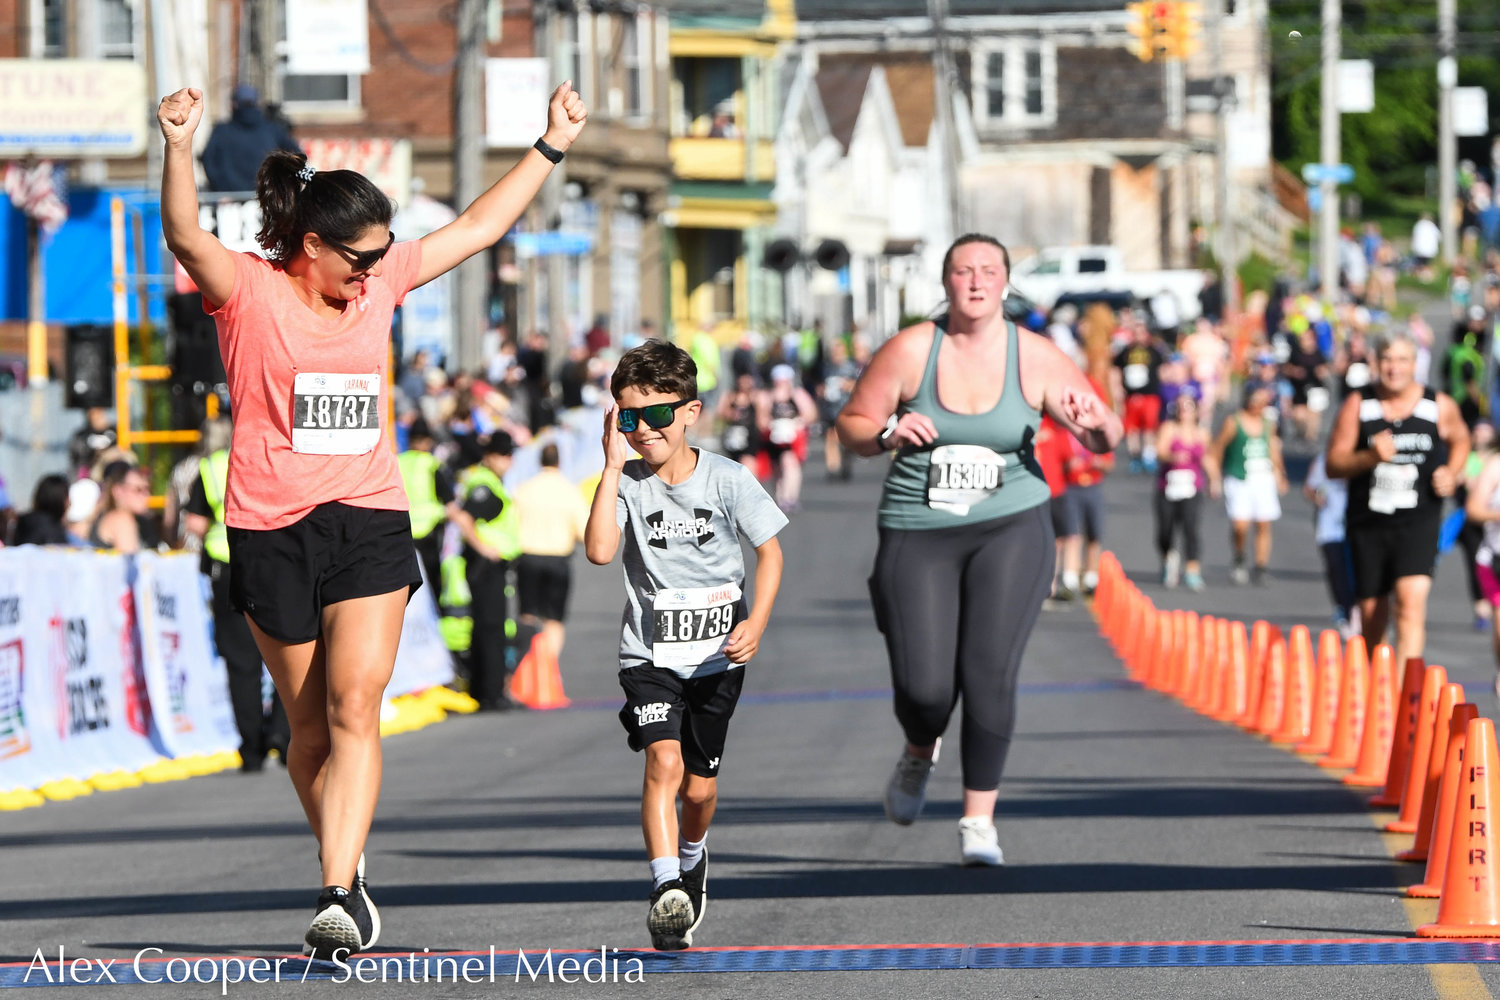 5K runners Amanda Yesensky and her son cross the finish line during the 45th Boilermaker Road Race on Sunday.